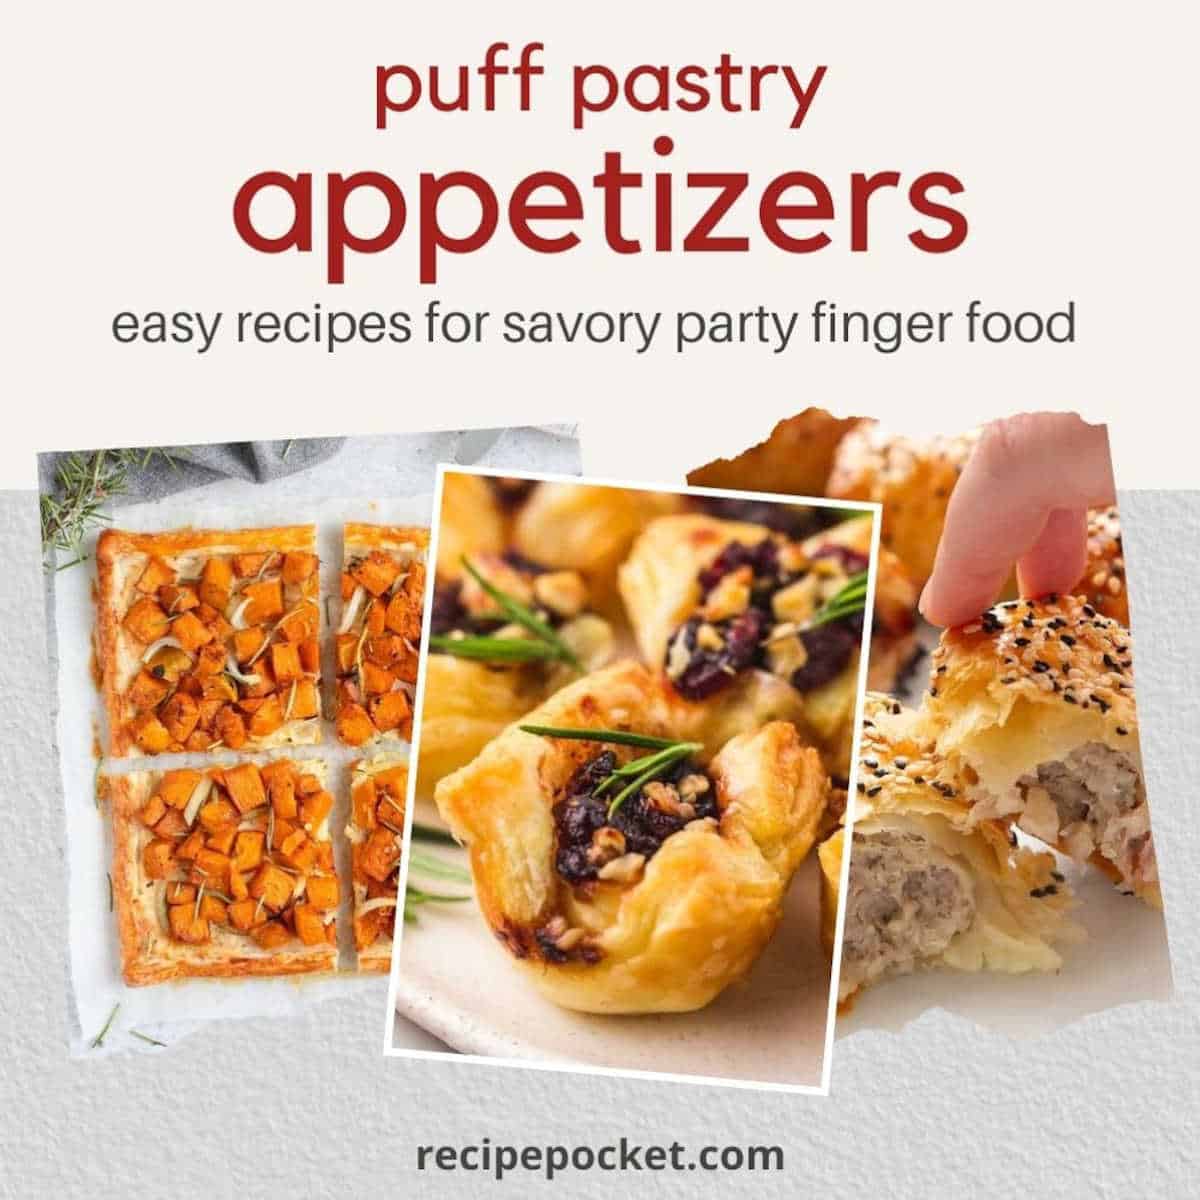 Image showing three puff pastry appetizers.